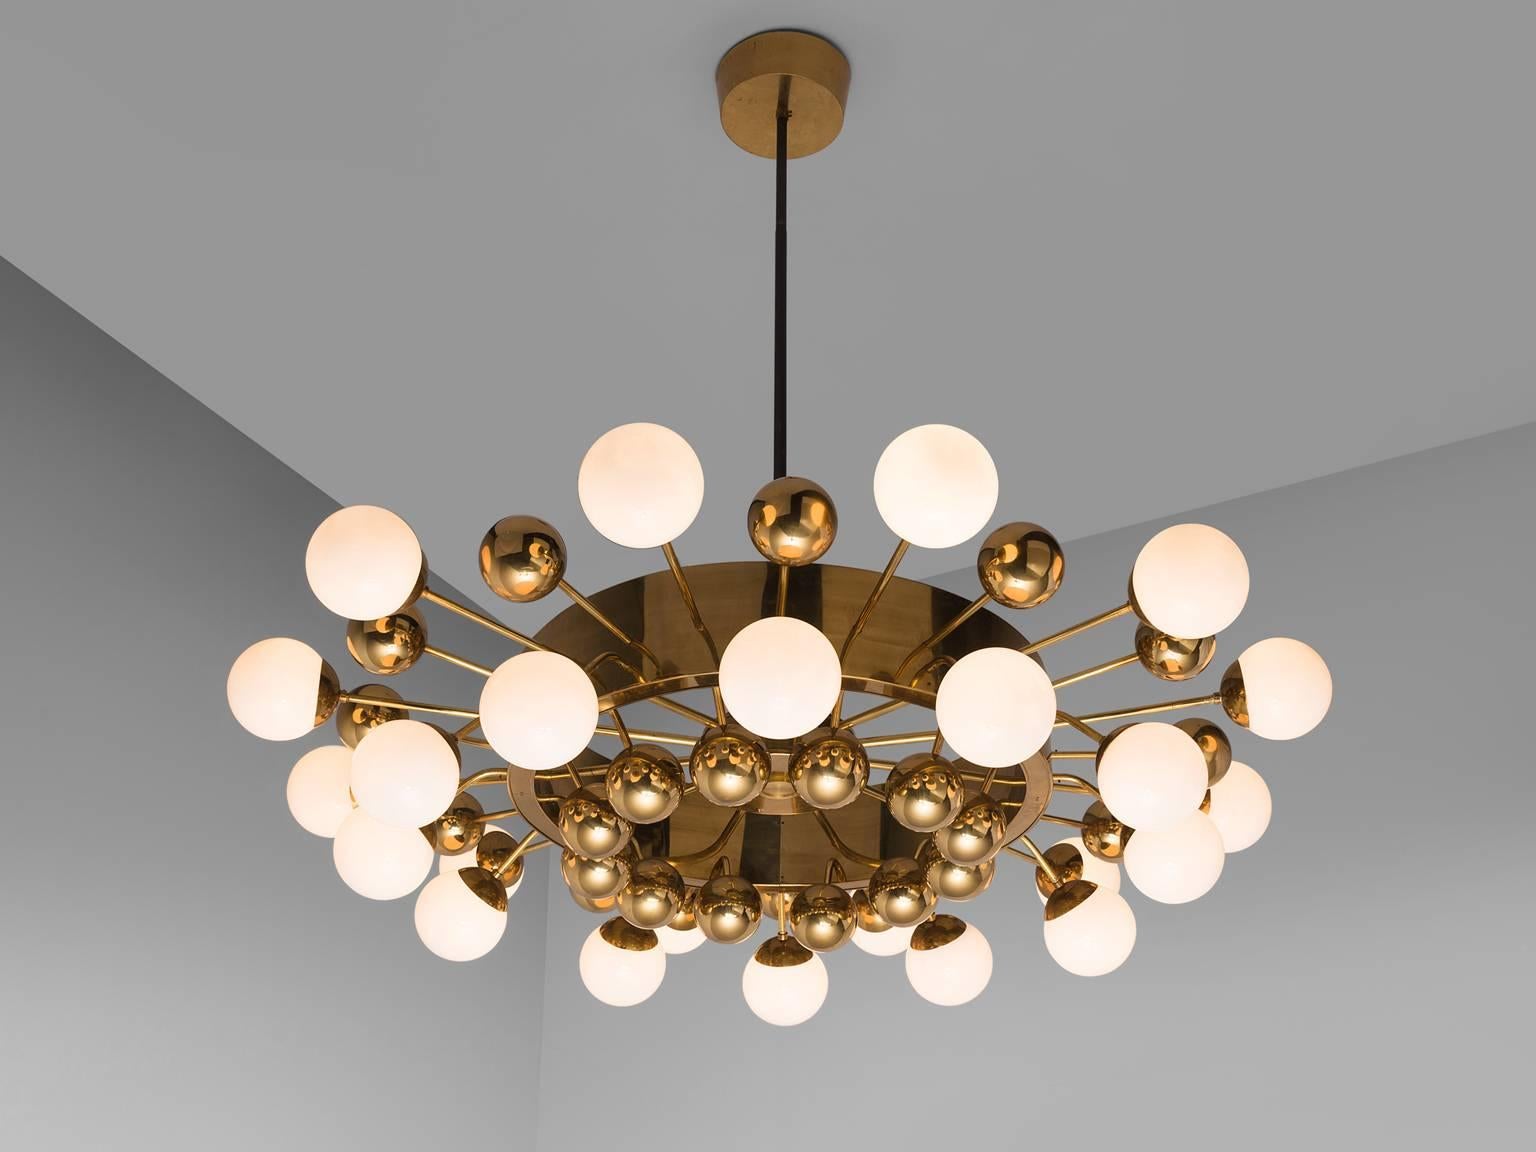 Large Sputnik chandelier in glass and brass, Europe, 1960s.

This Sputnik chandelier is a wonderful example of midcentury design. The grand chandelier is executed with a brass fixture and opaline glass spheres. The chandelier exists of two layers